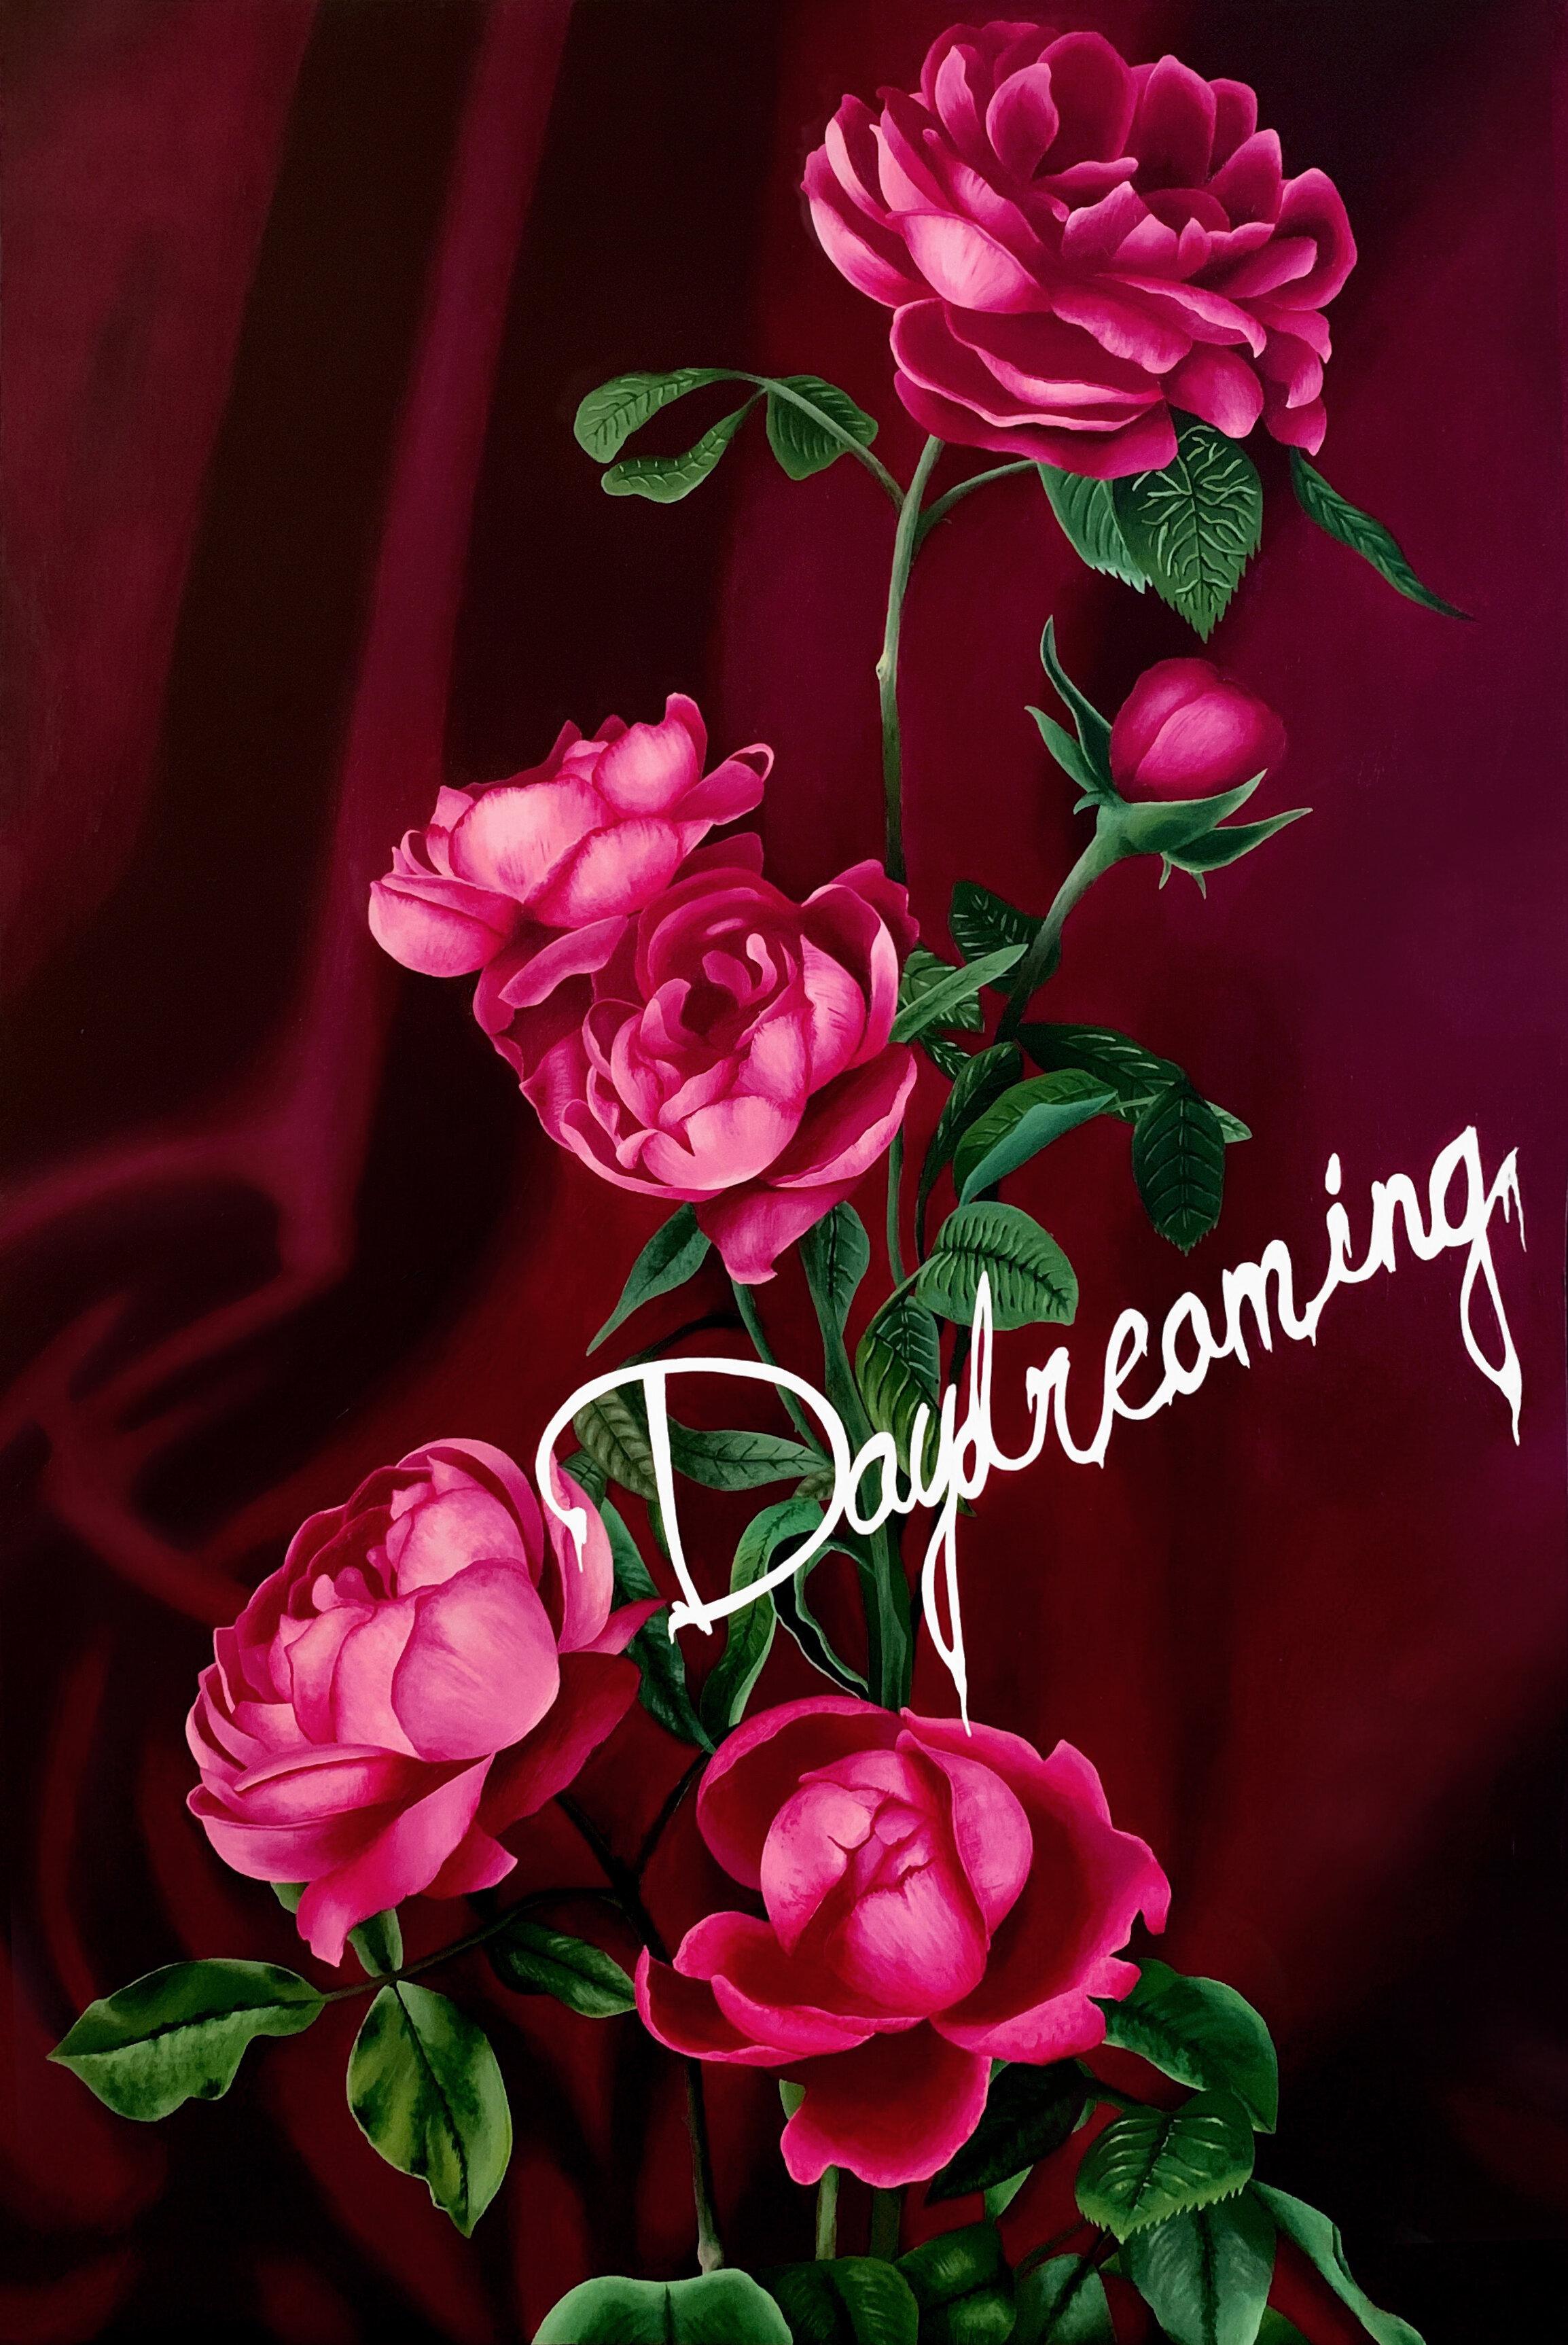 Daydreaming - Painting by Diana Georgie